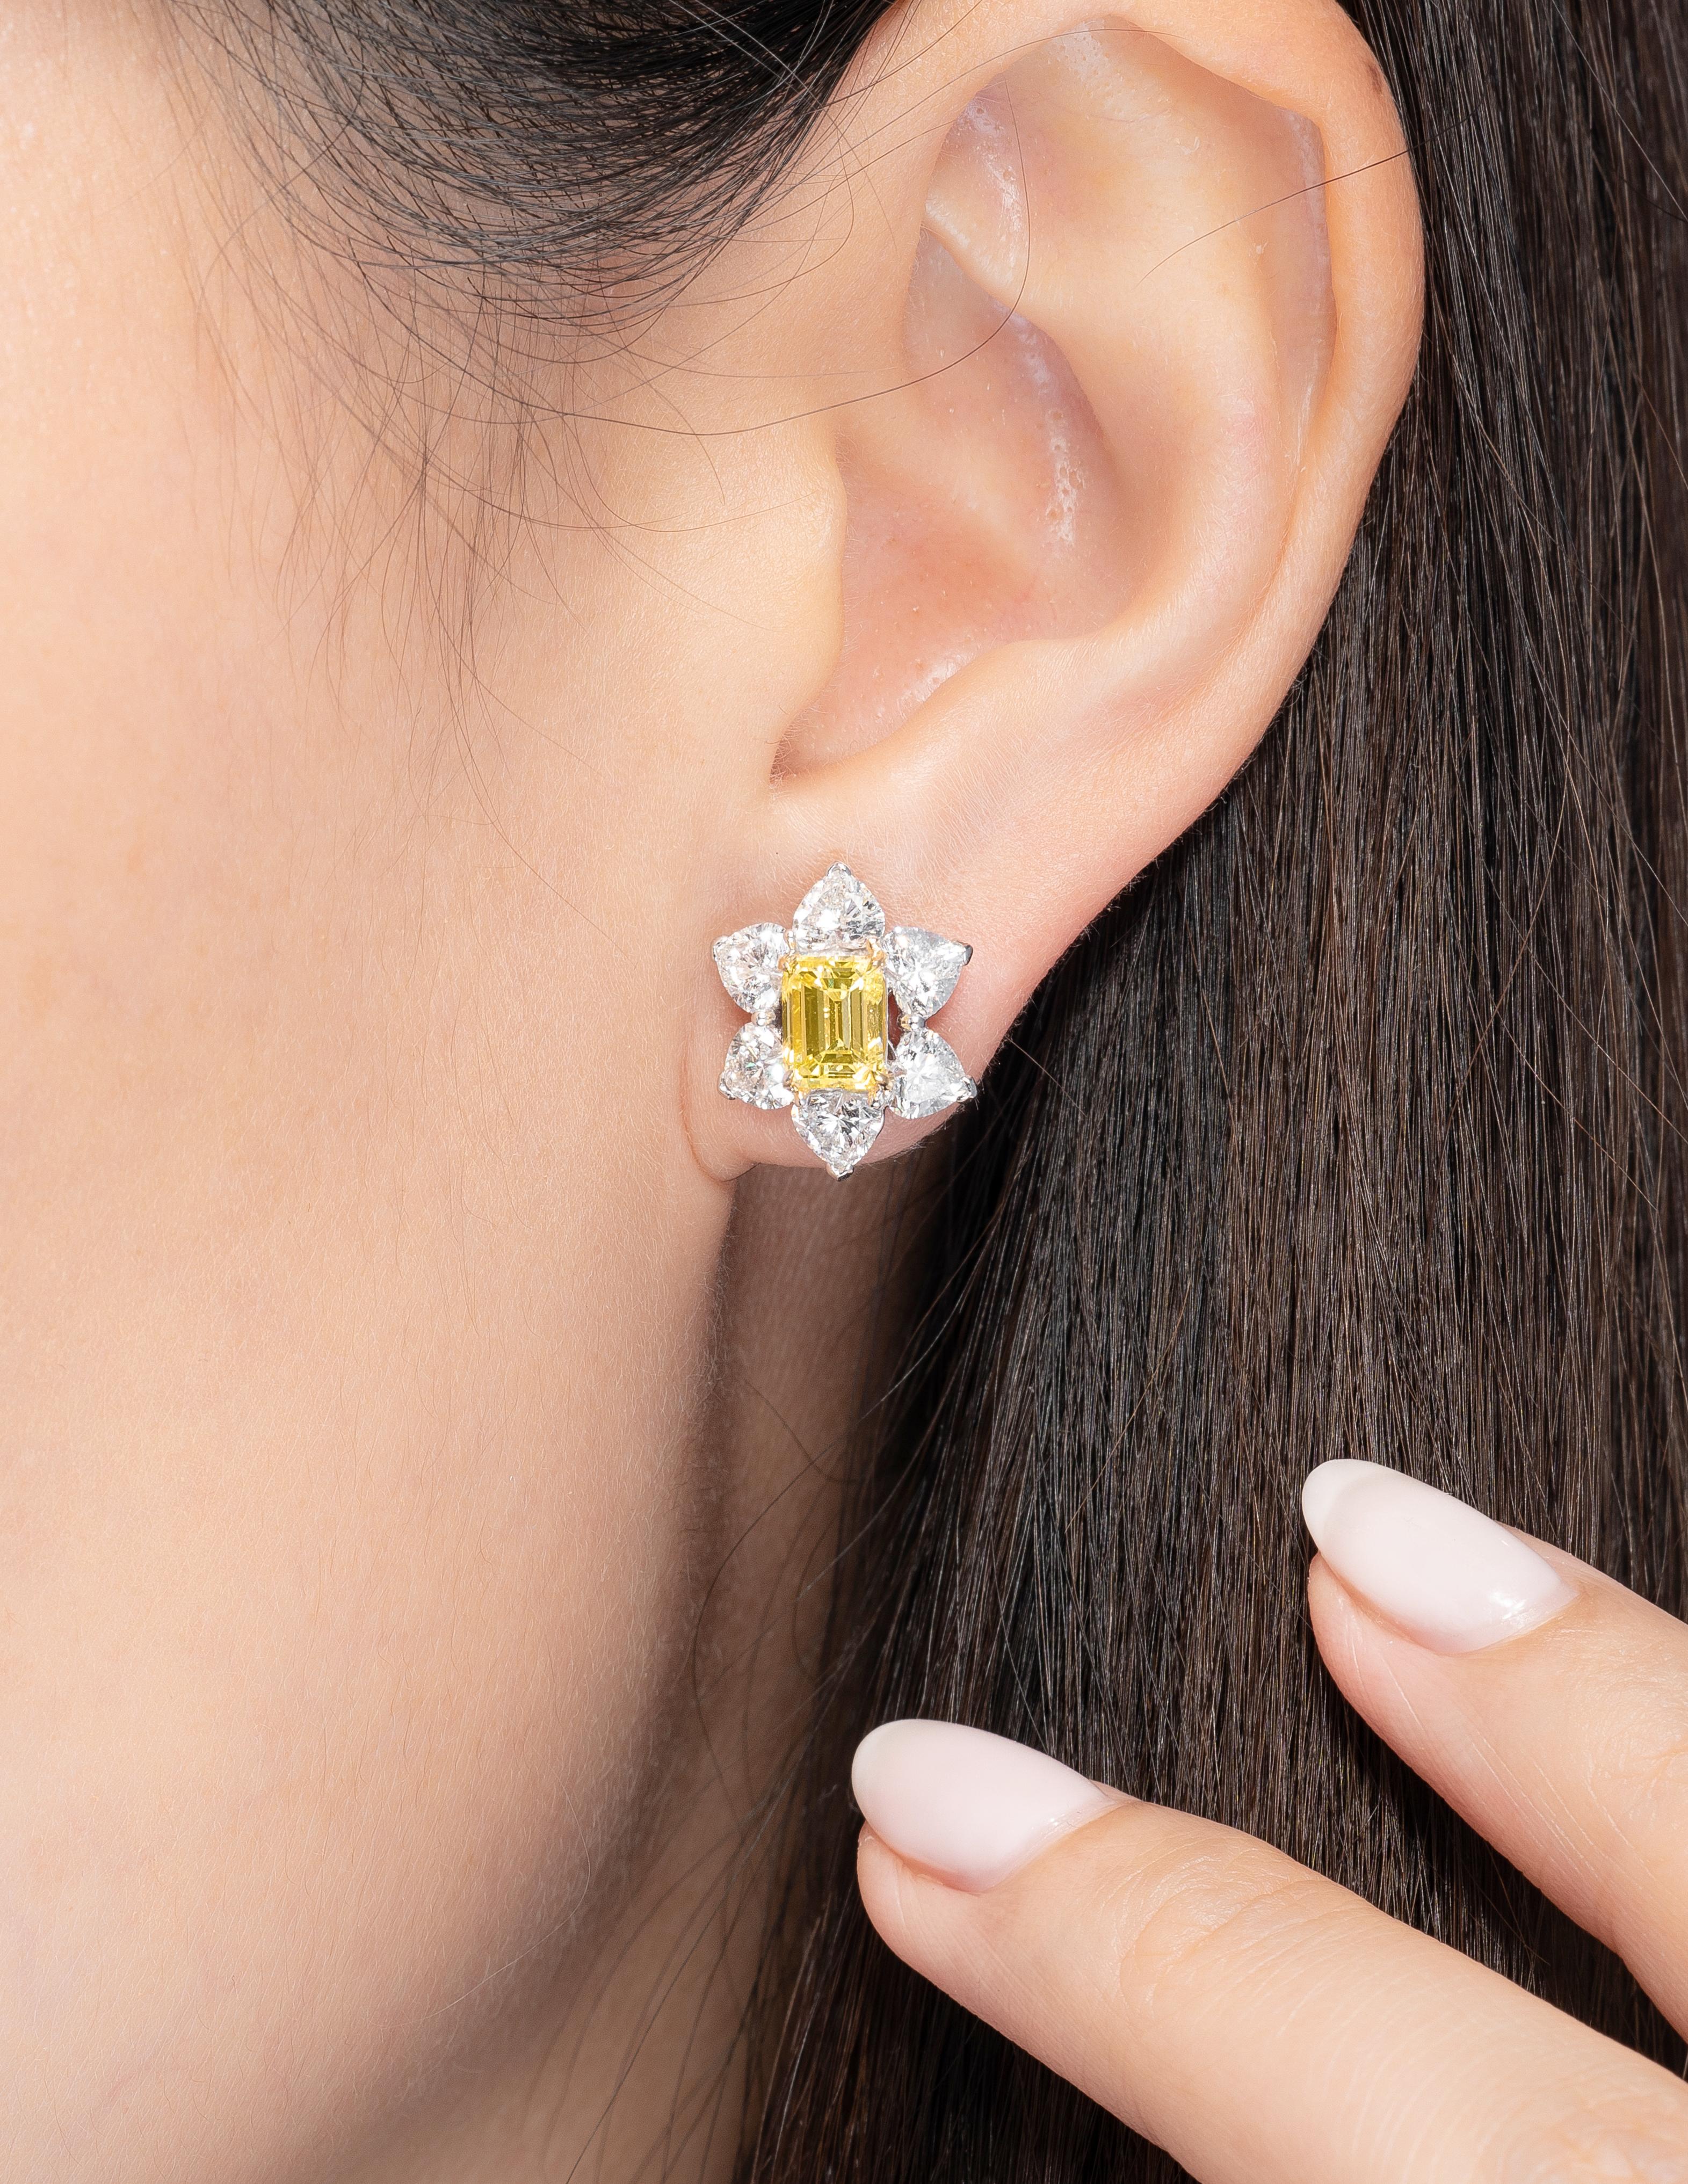 This item is available for custom order only. 

Vihari Jewels floral earrings featuring a 1.06 carat Fancy Light Yellow emerald shape diamond with a VS1 clarity (GIA Certificate #6204330542) and a 1.06 carat Fancy Yellow emerald shape diamond with a